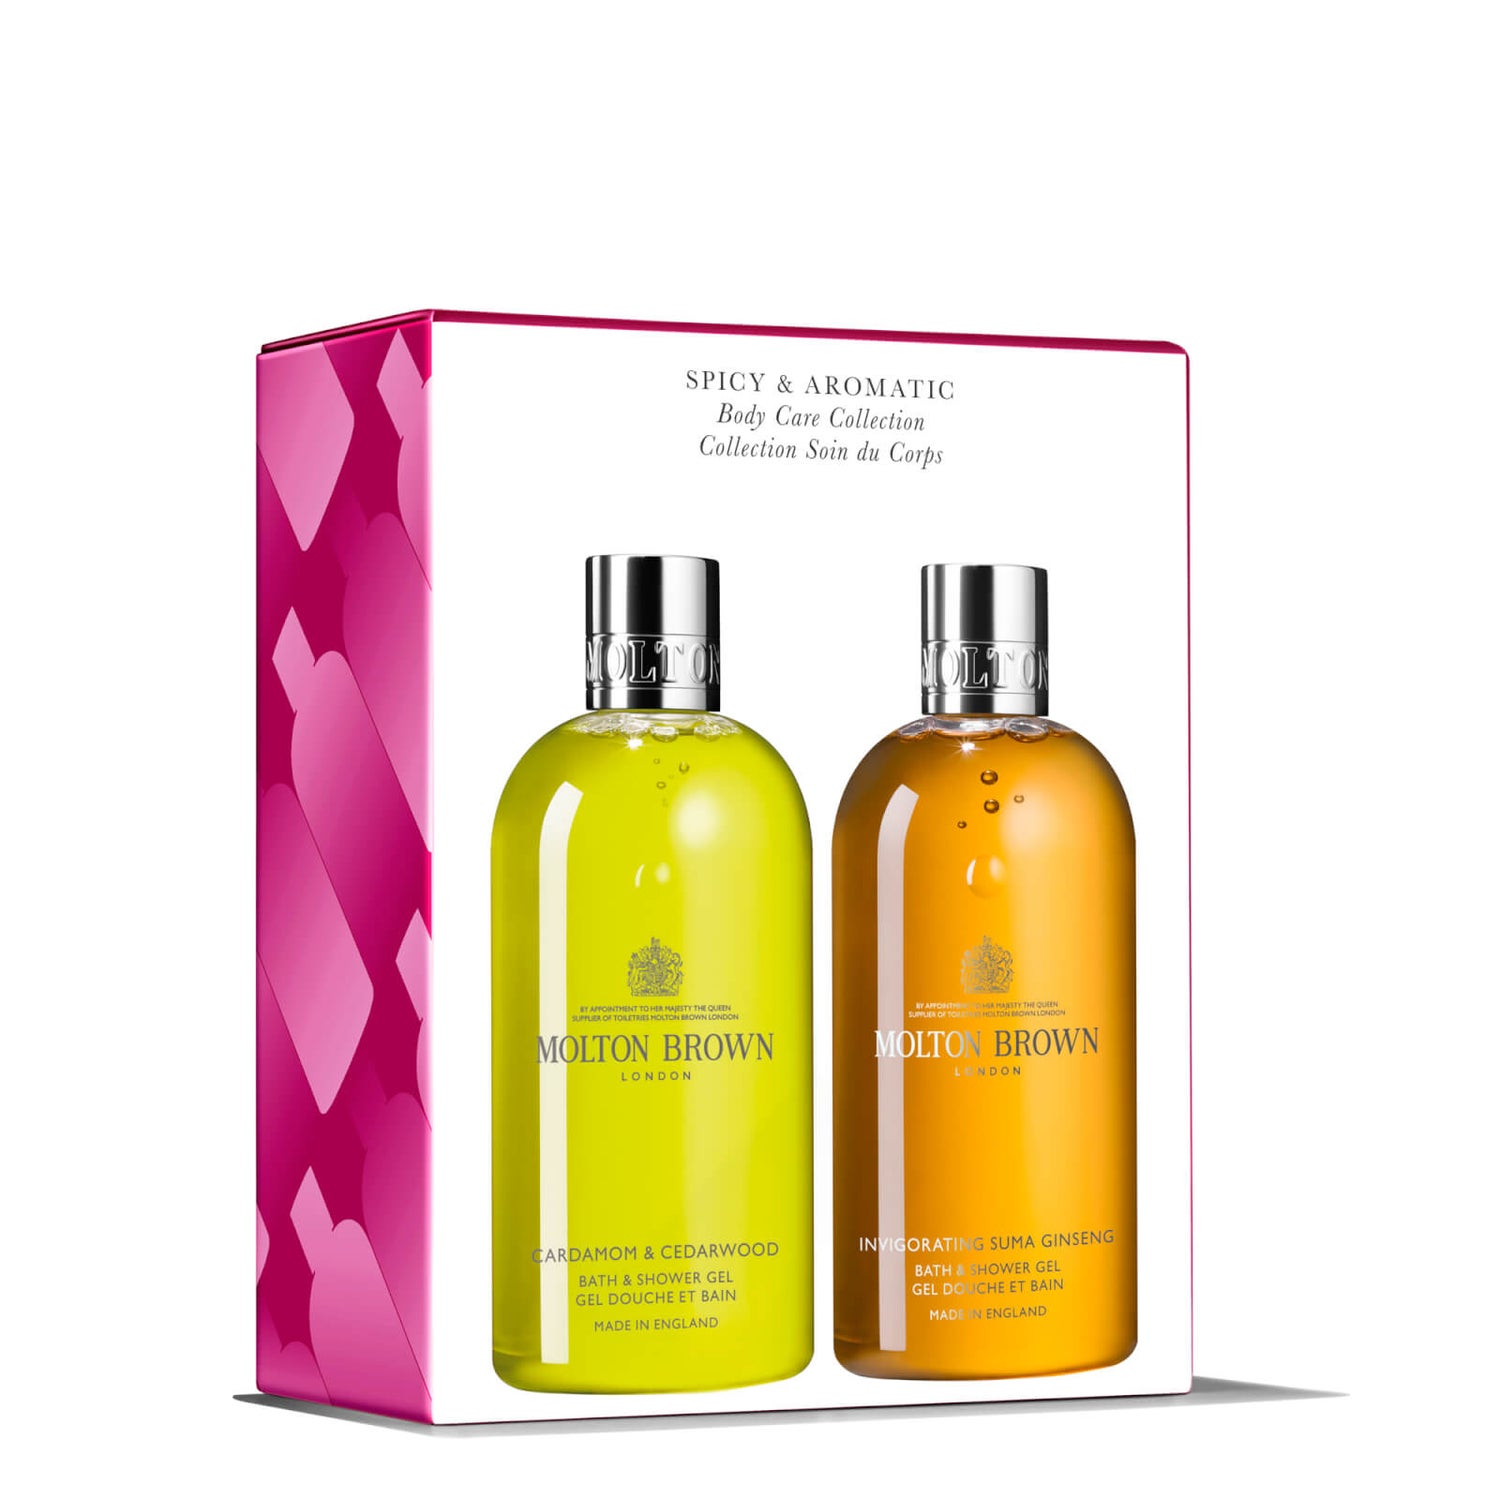 Molton Brown Spicy & Aromatic Body Care Collection (Worth £50.00)